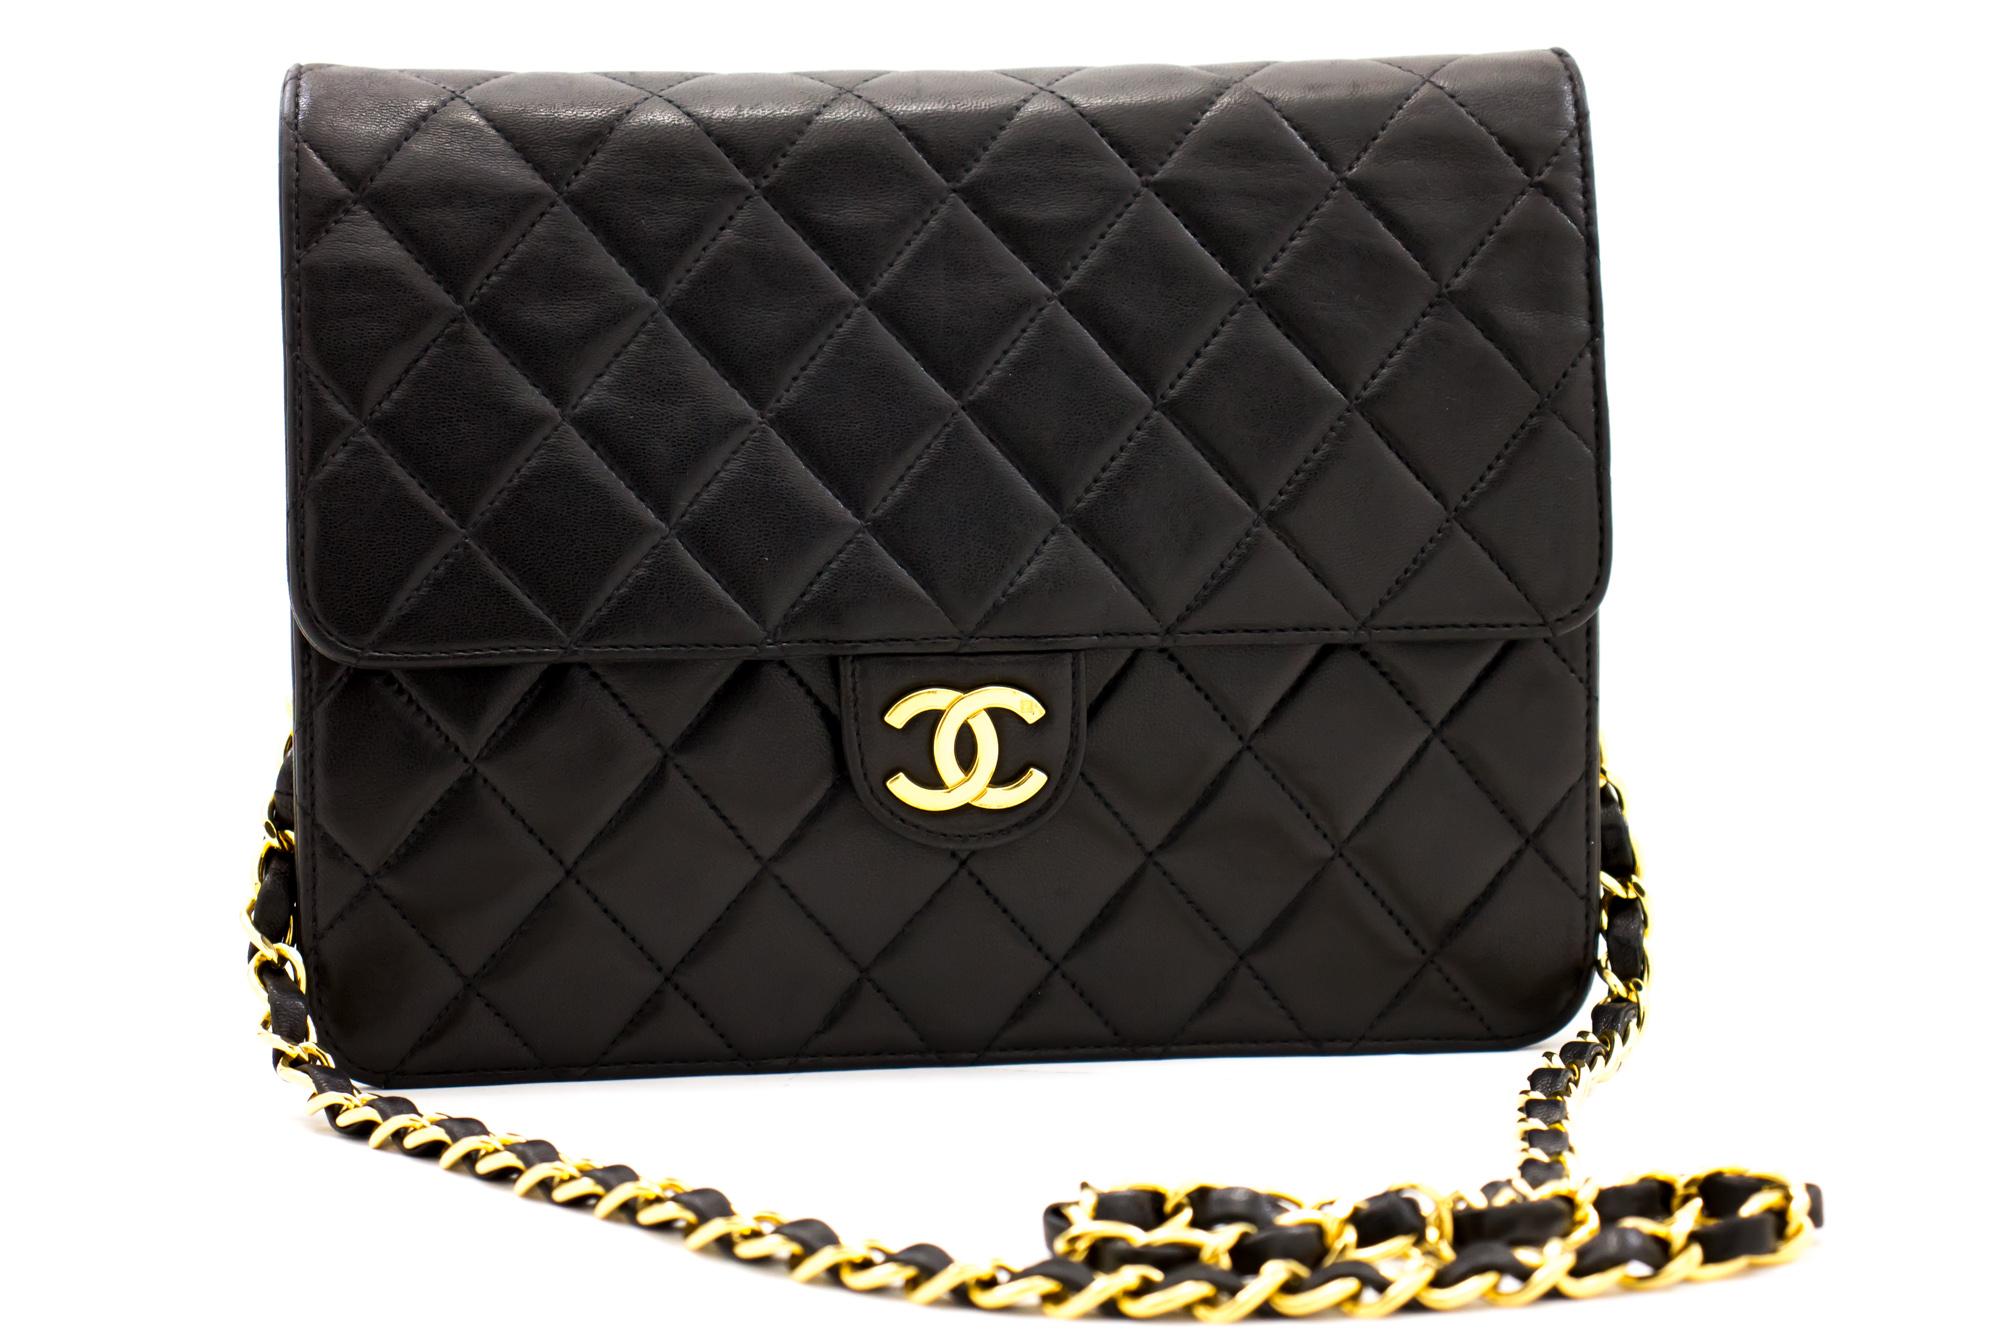 An authentic CHANEL Small Chain Shoulder Bag Clutch Black Quilted Flap made of black Lambskin. The color is Black. The outside material is Leather. The pattern is Solid. This item is Contemporary. The year of manufacture would be 1986.
Conditions &